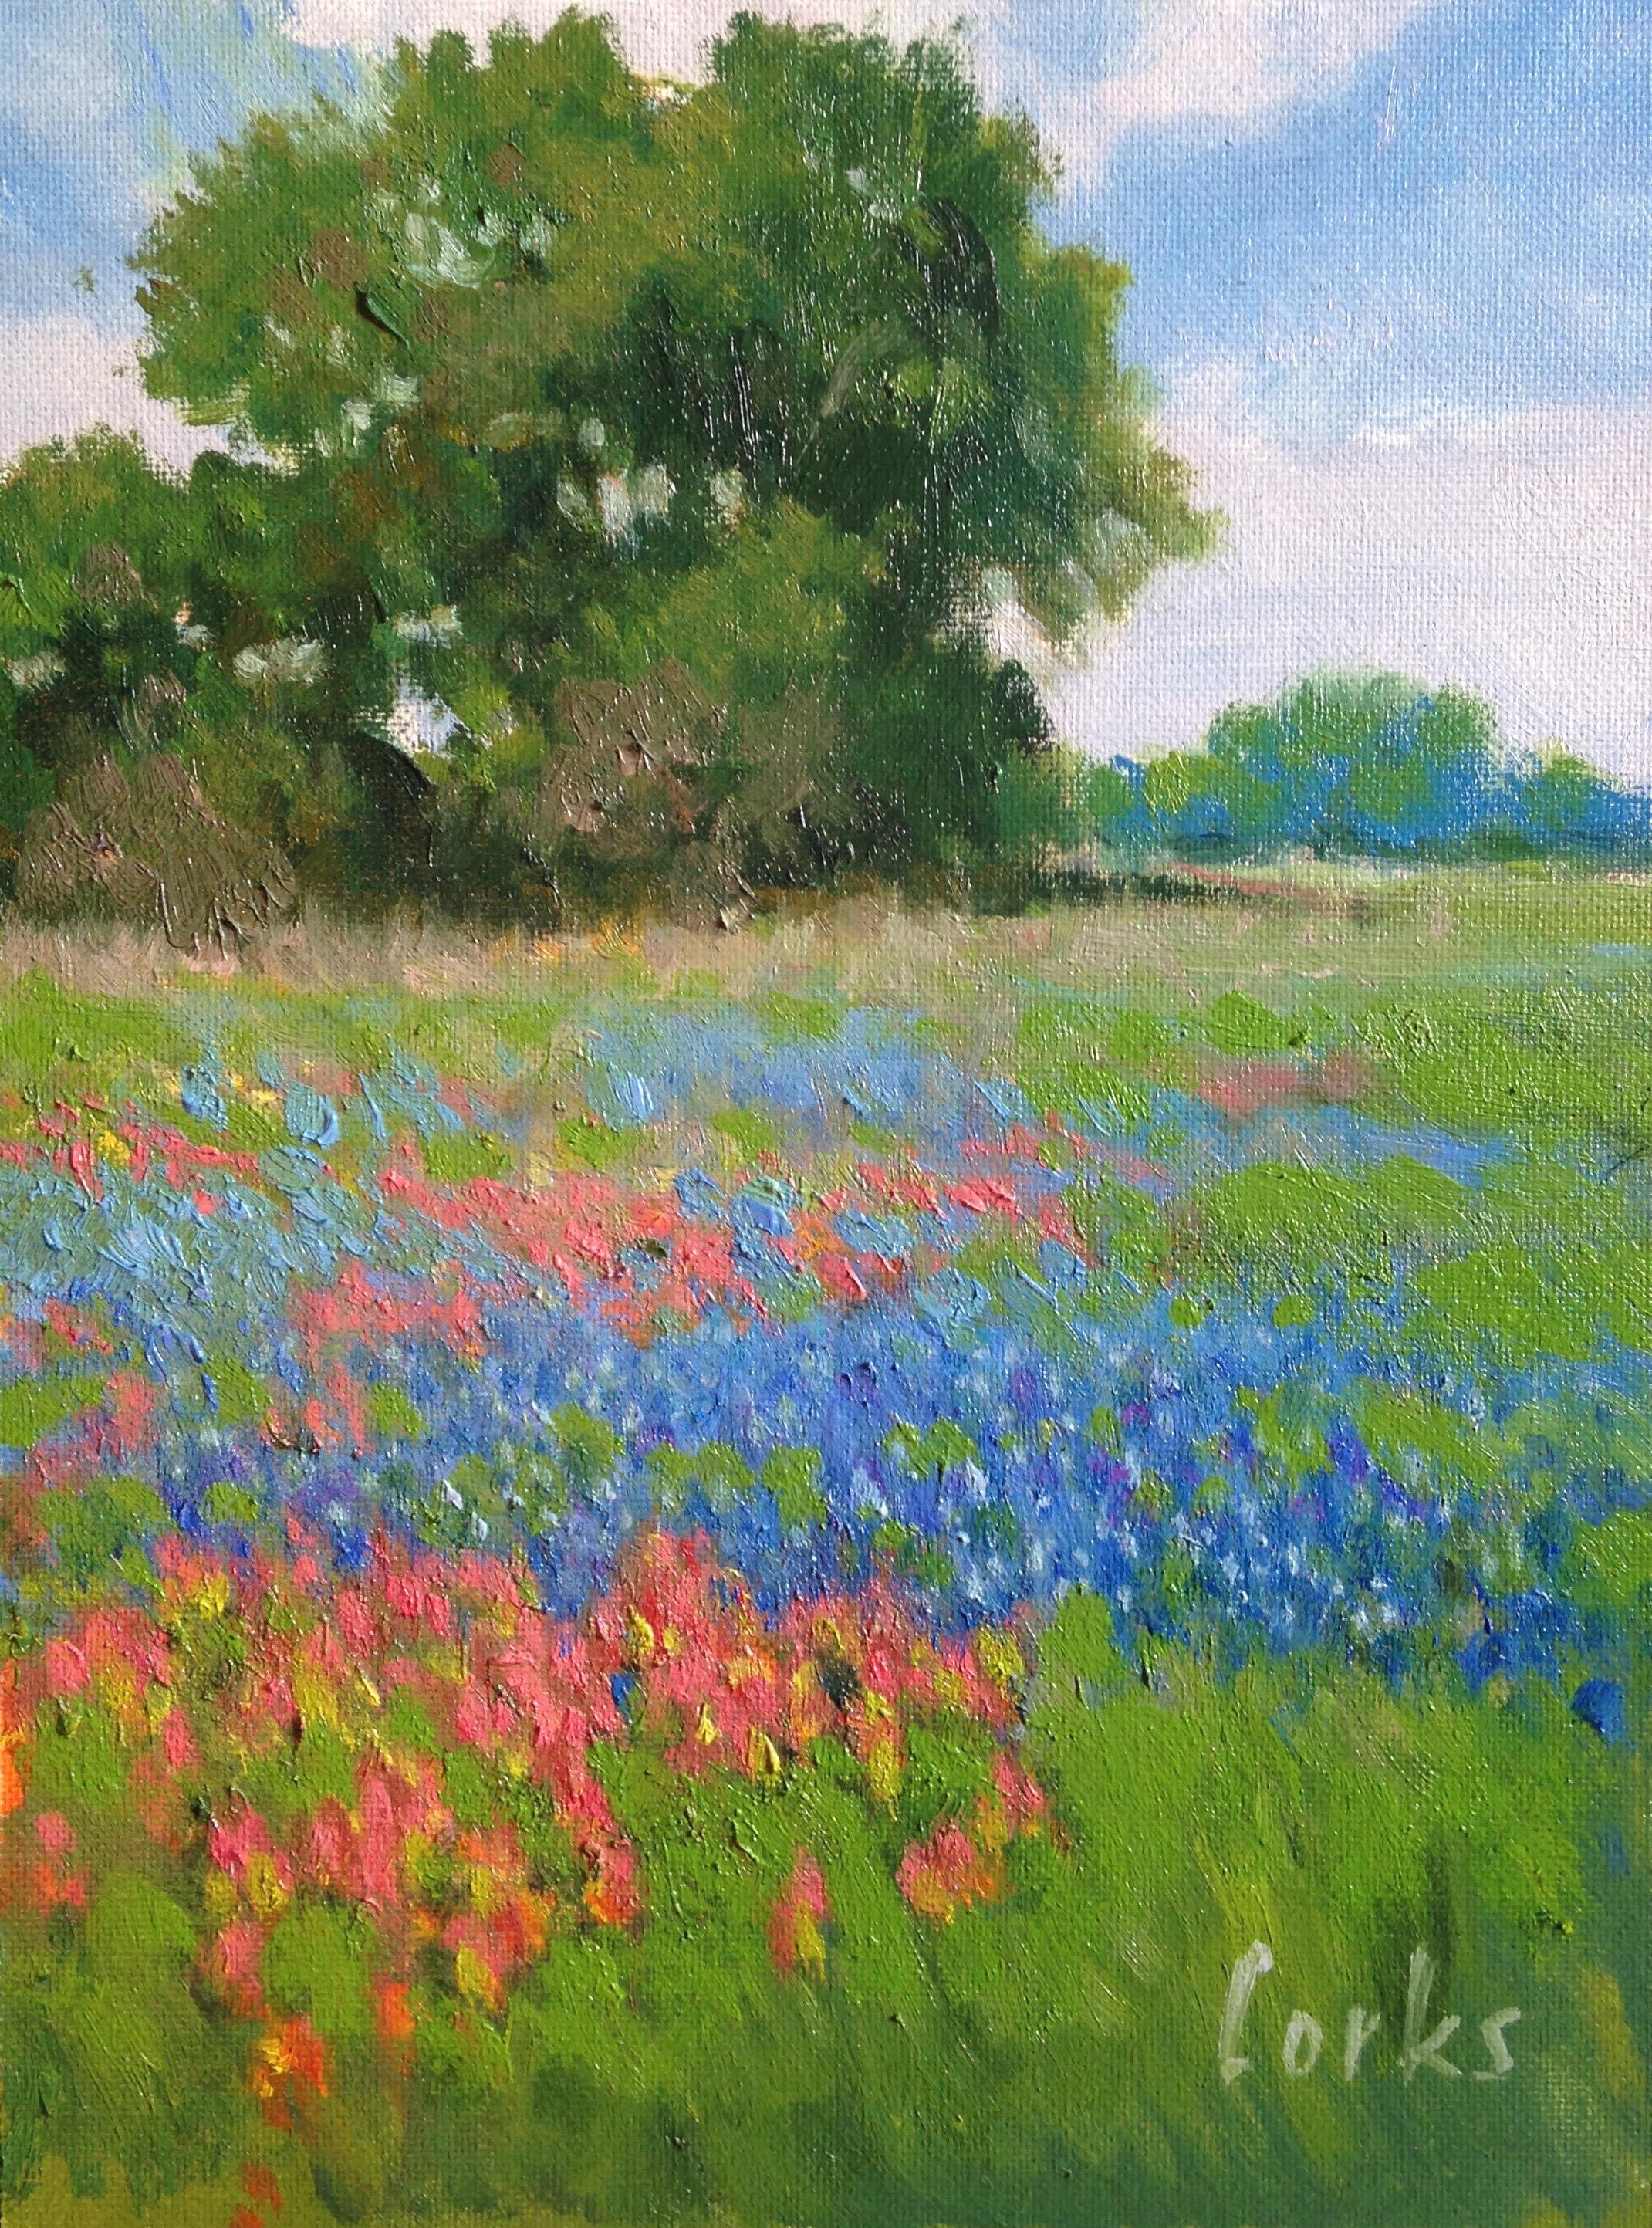 Bluebonnets and Paintbrush - Art by David Forks